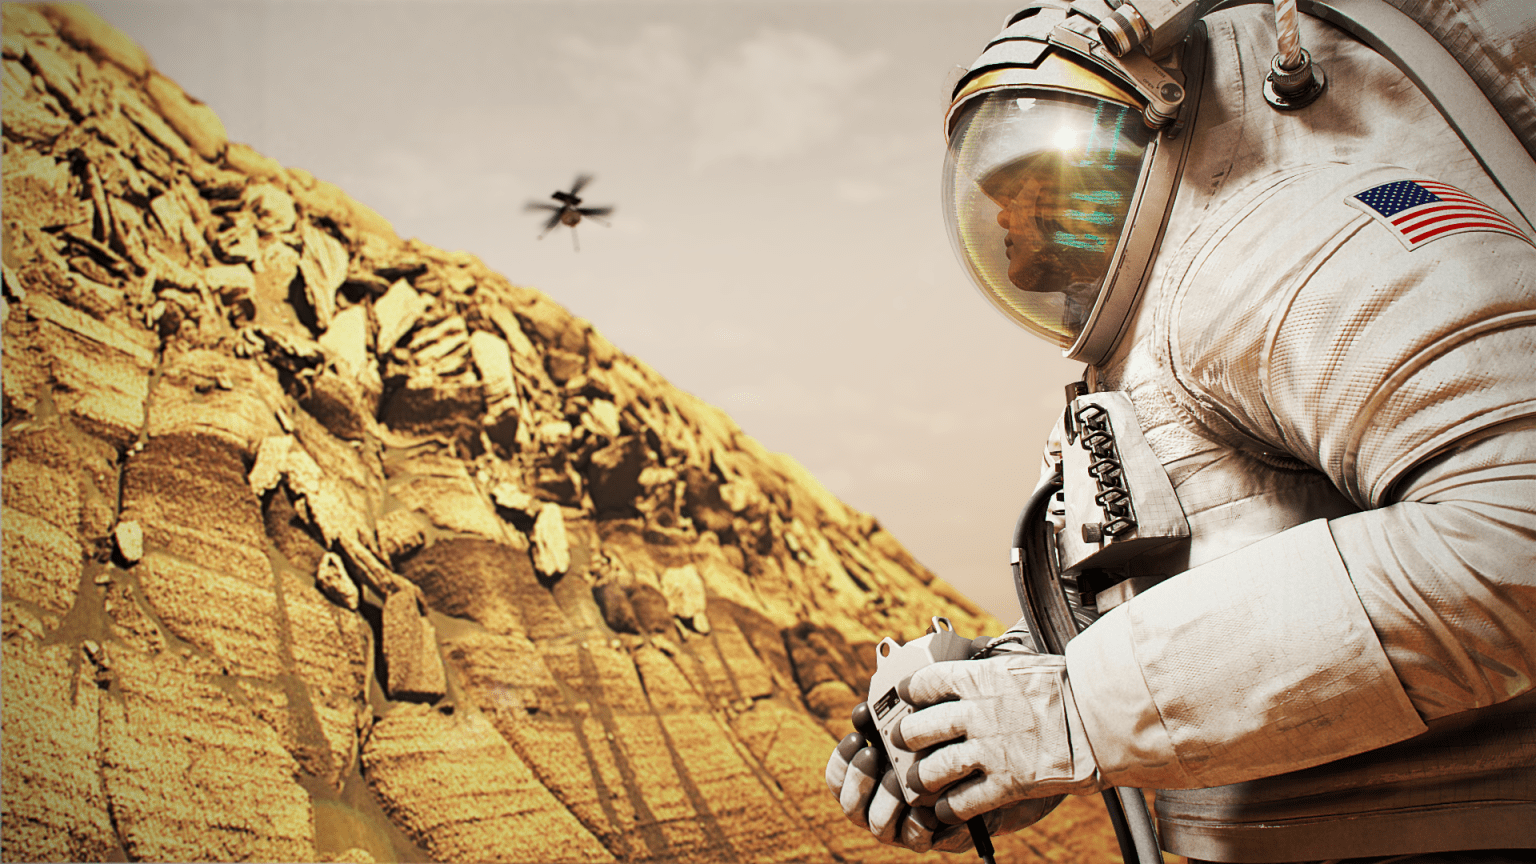 Illustration of an astronaut on Mars, using a remote control drone to inspect a nearby cliff. The camera view is looking up at the astronaut, with the drone far above in the distance.